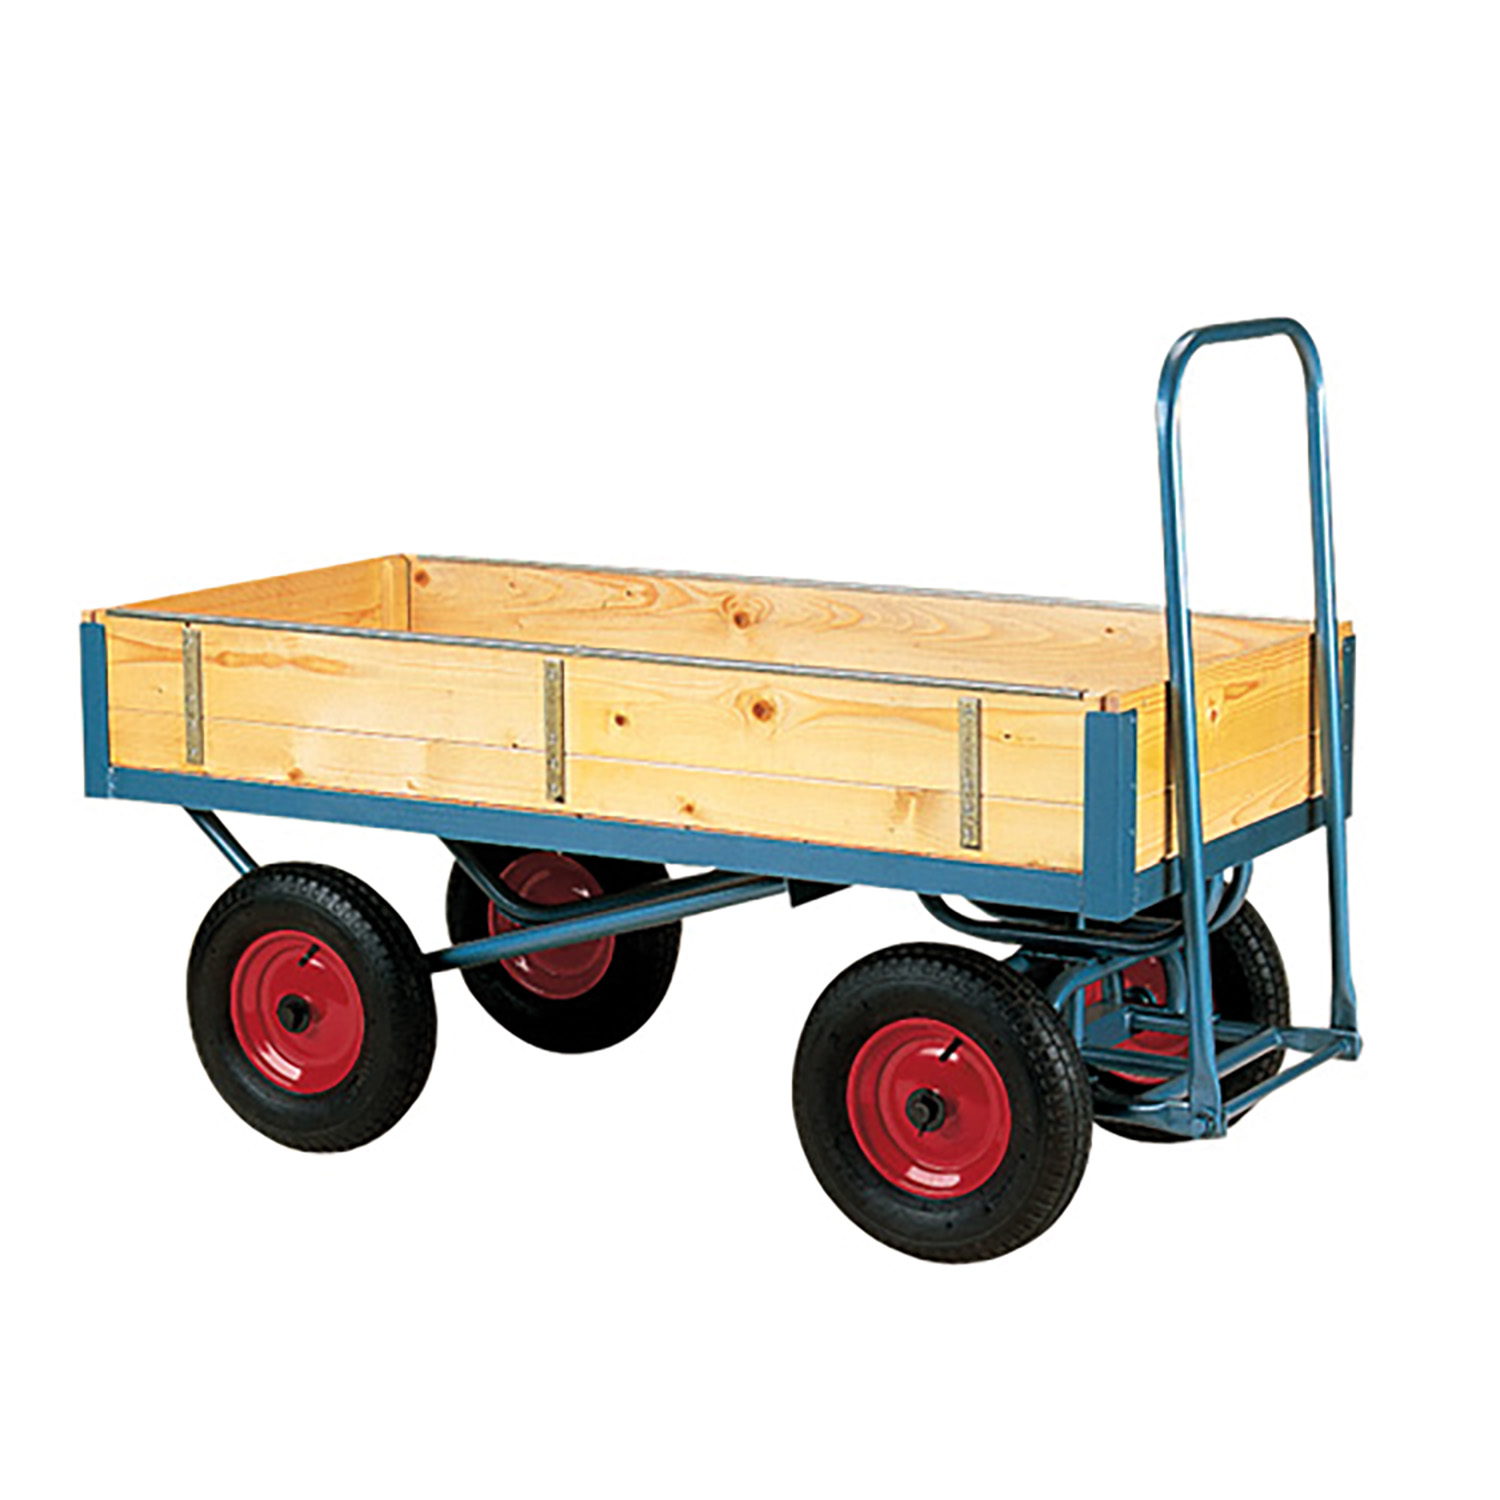 STUBBS FOUR WHEEL REMOVABLE SIDED TROLLEY S2109D